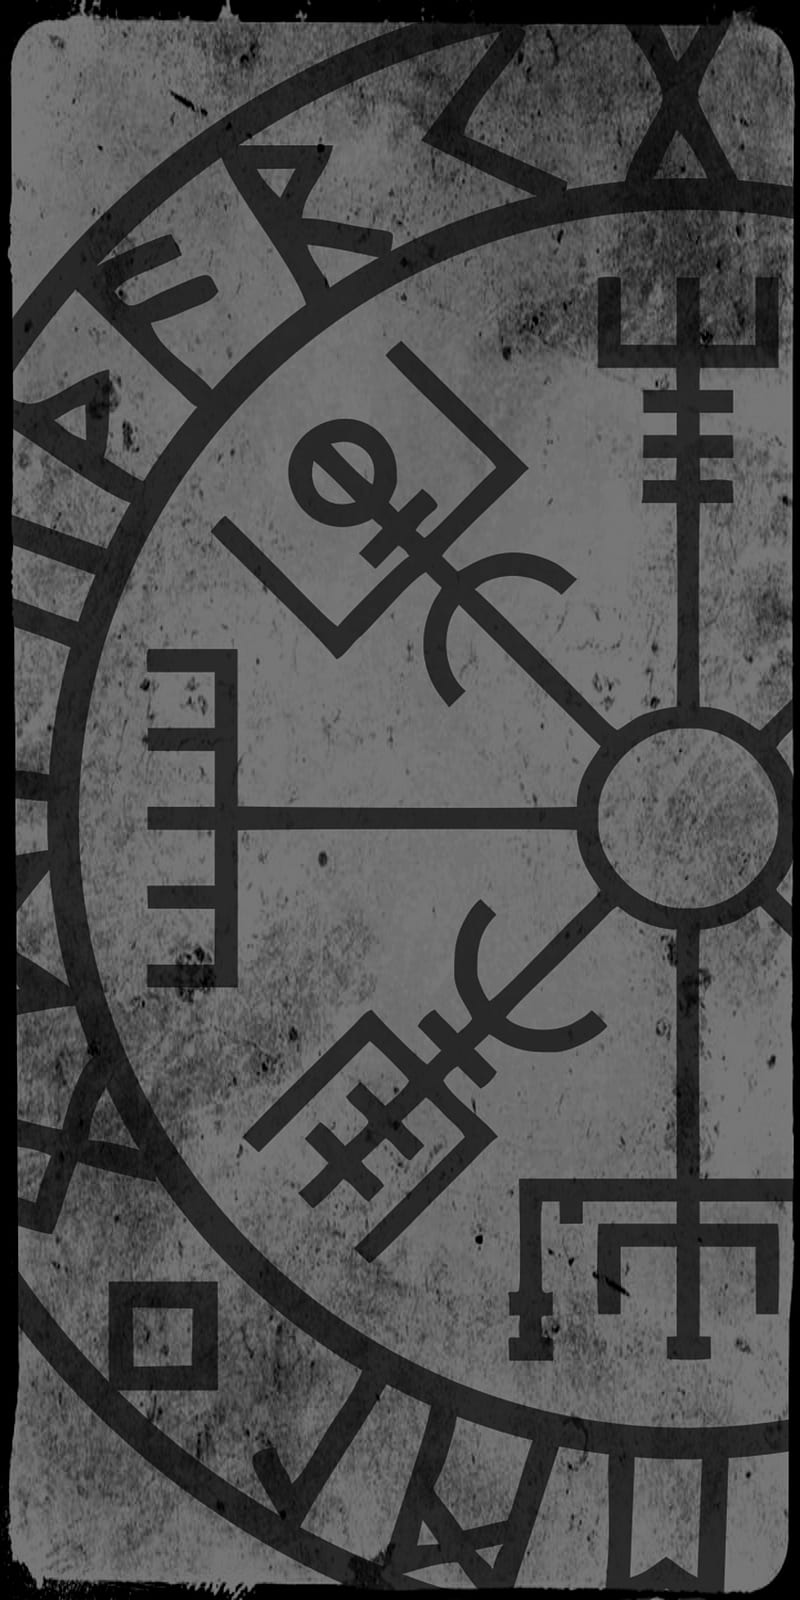 Buy VEGVÍSIR Phone Wallpaper Smartphone Iphone Samsung Android Online in  India  Etsy